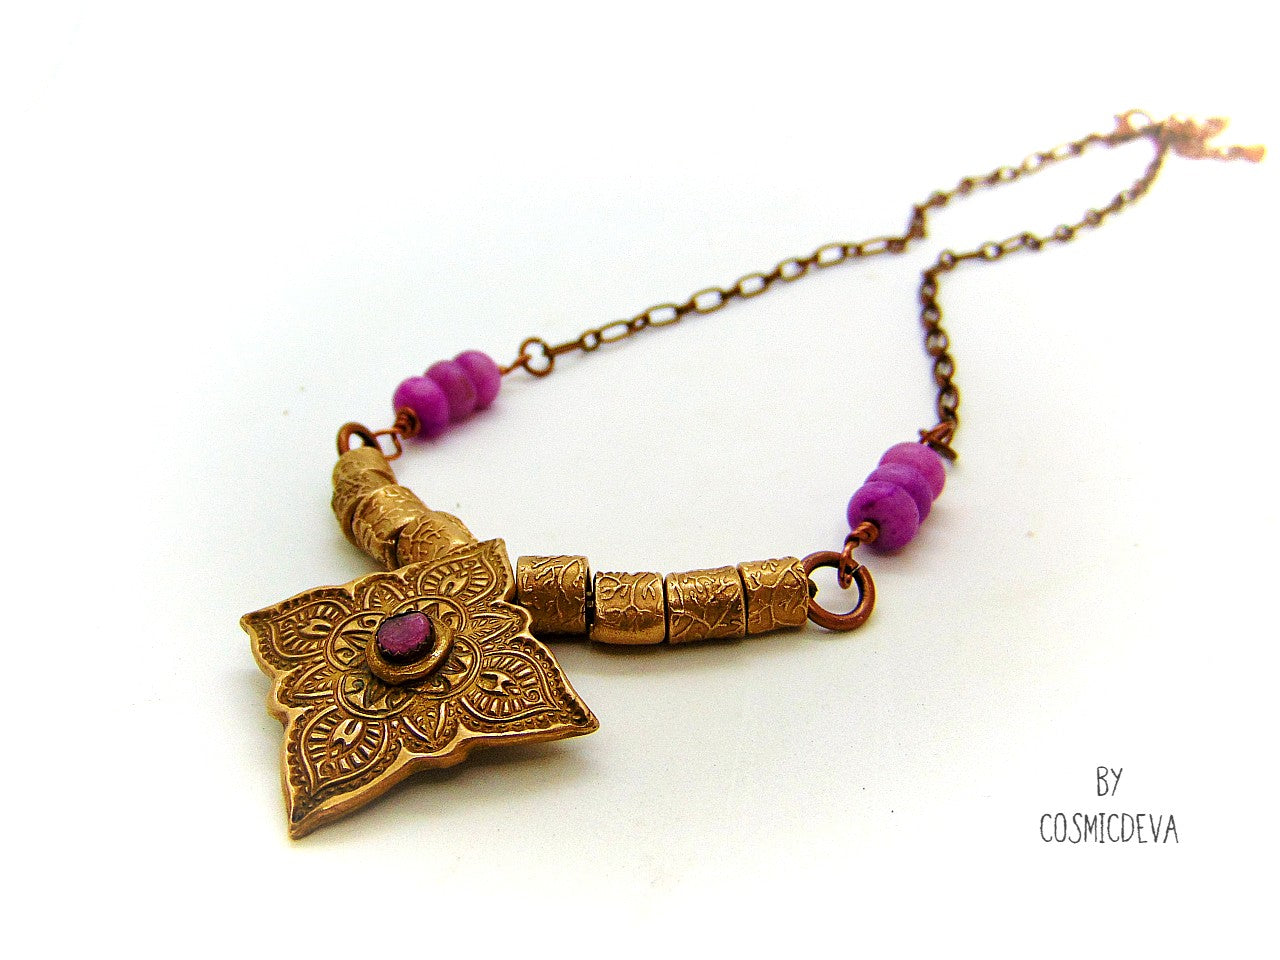 Enliven your wardrobe with this stunning Pink Tourmaline Mandala Mehndi Gold Bronze Necklace! Crafted with a unique hand formed bronze mandala pendant, pink tourmaline gemstone, and lovely pink jasper rondelle beads, this piece is perfect for yoga meditations or everyday wear. Adorn yourself with inspiring beauty! 